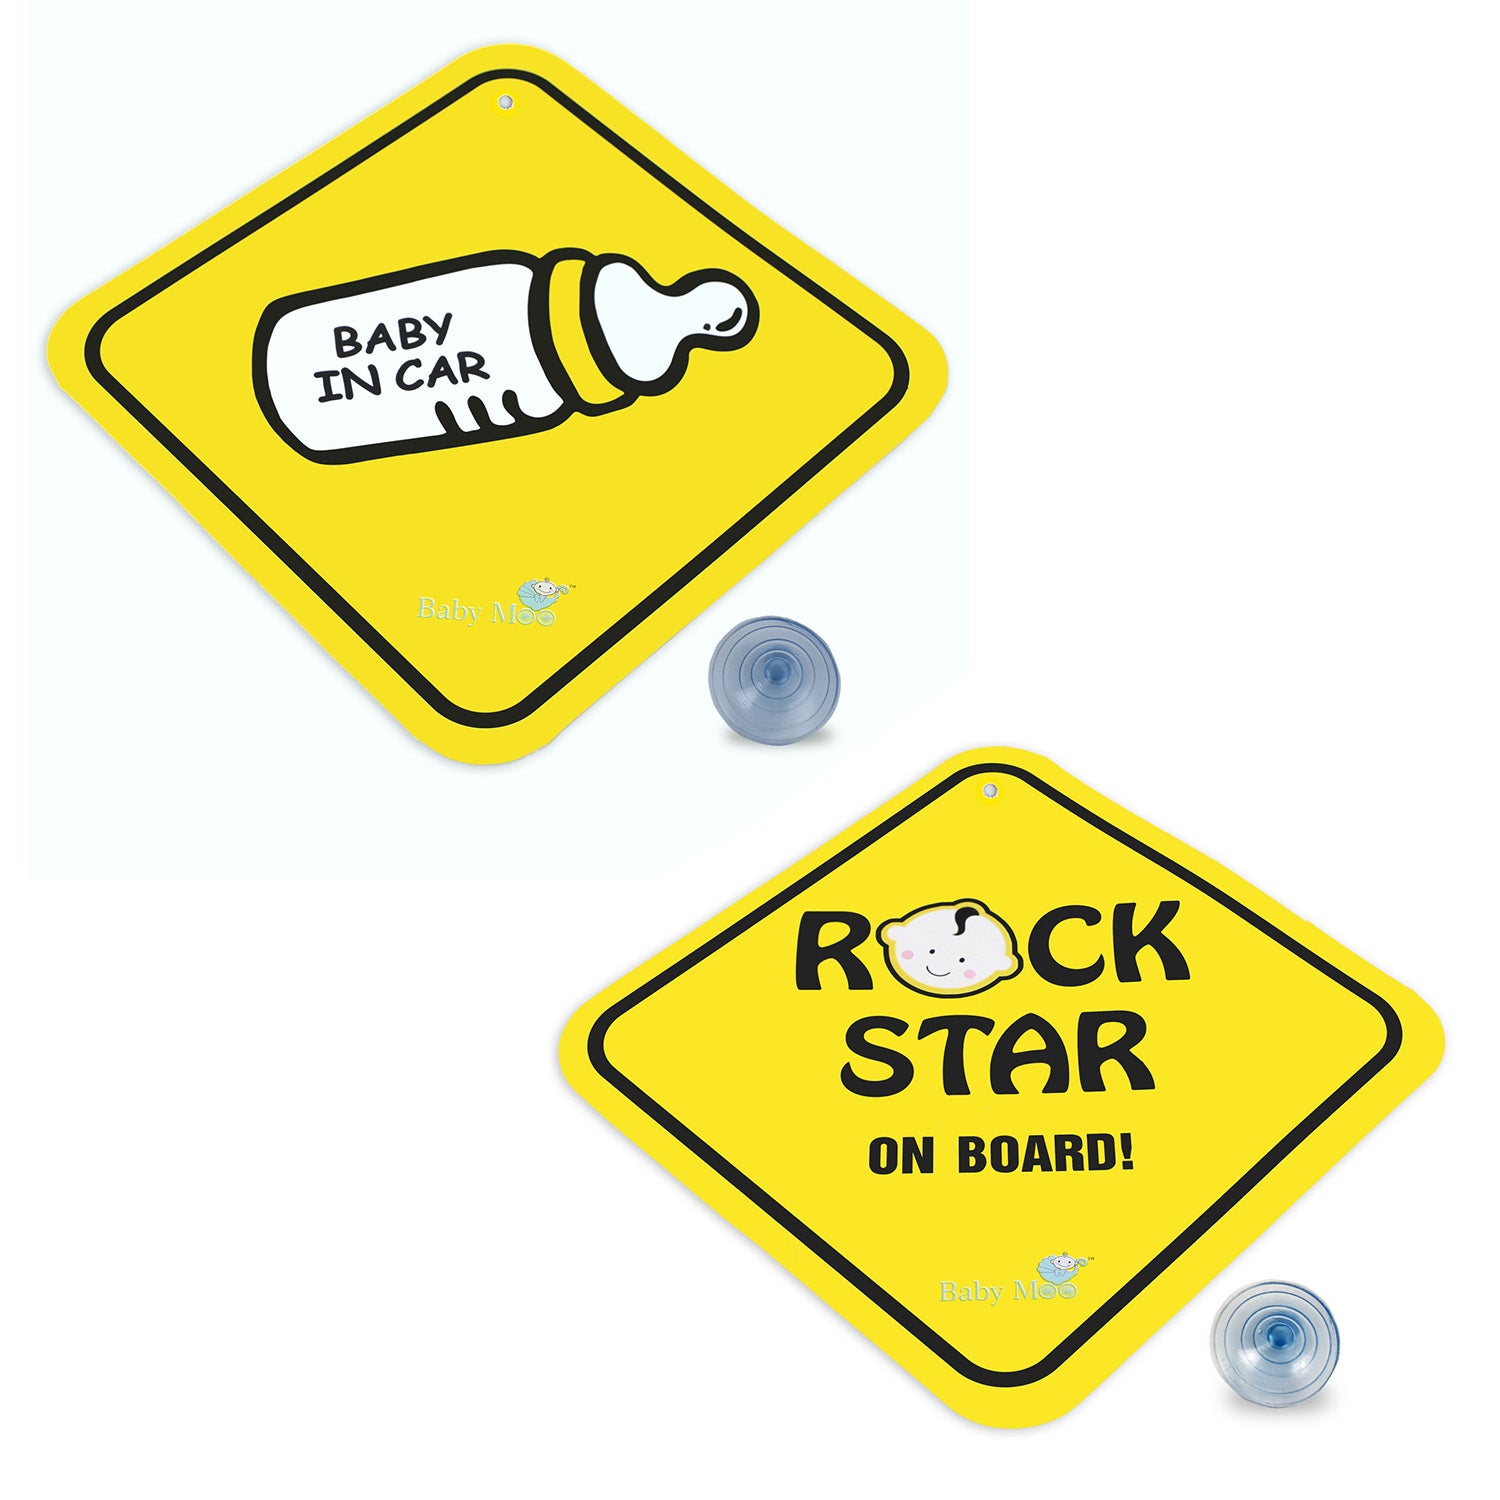 Baby Moo Car Safety Sign Rockstar Baby On Board With Suction Cup Clip 2 Pack - Yellow - Baby Moo